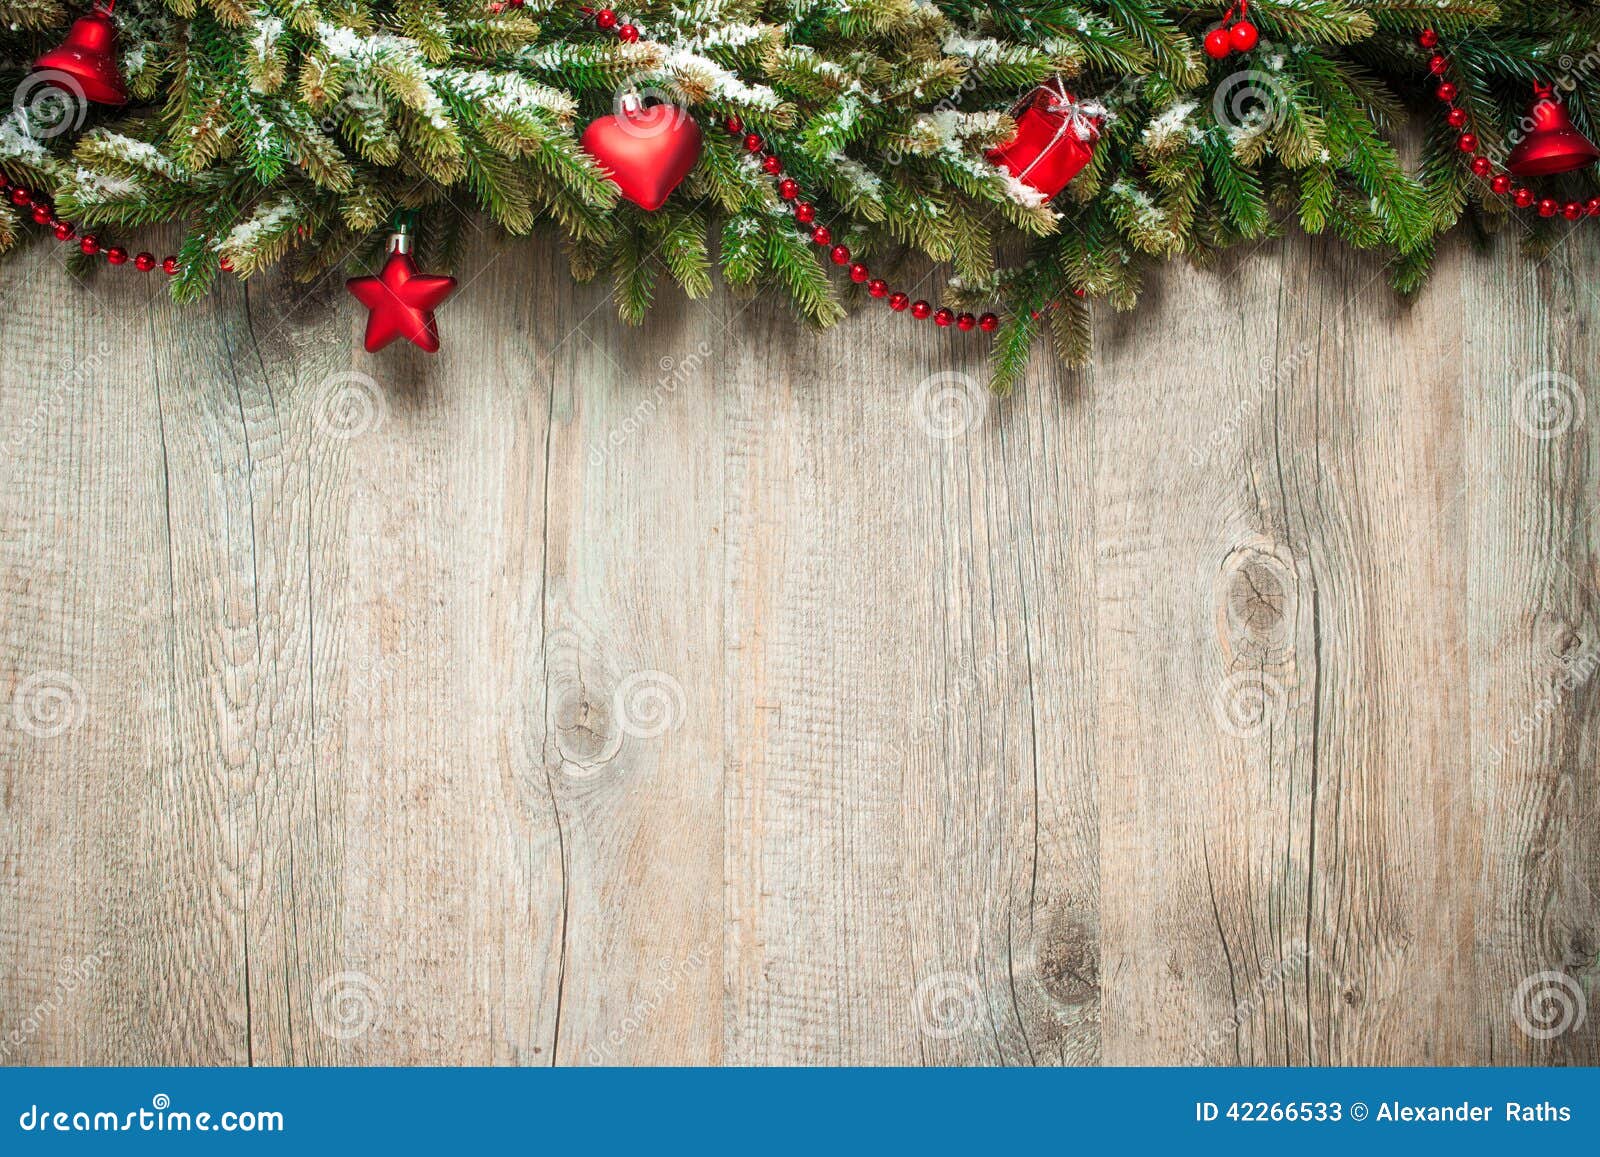 Christmas Decoration Over Wooden Background Stock Image - Image of ...